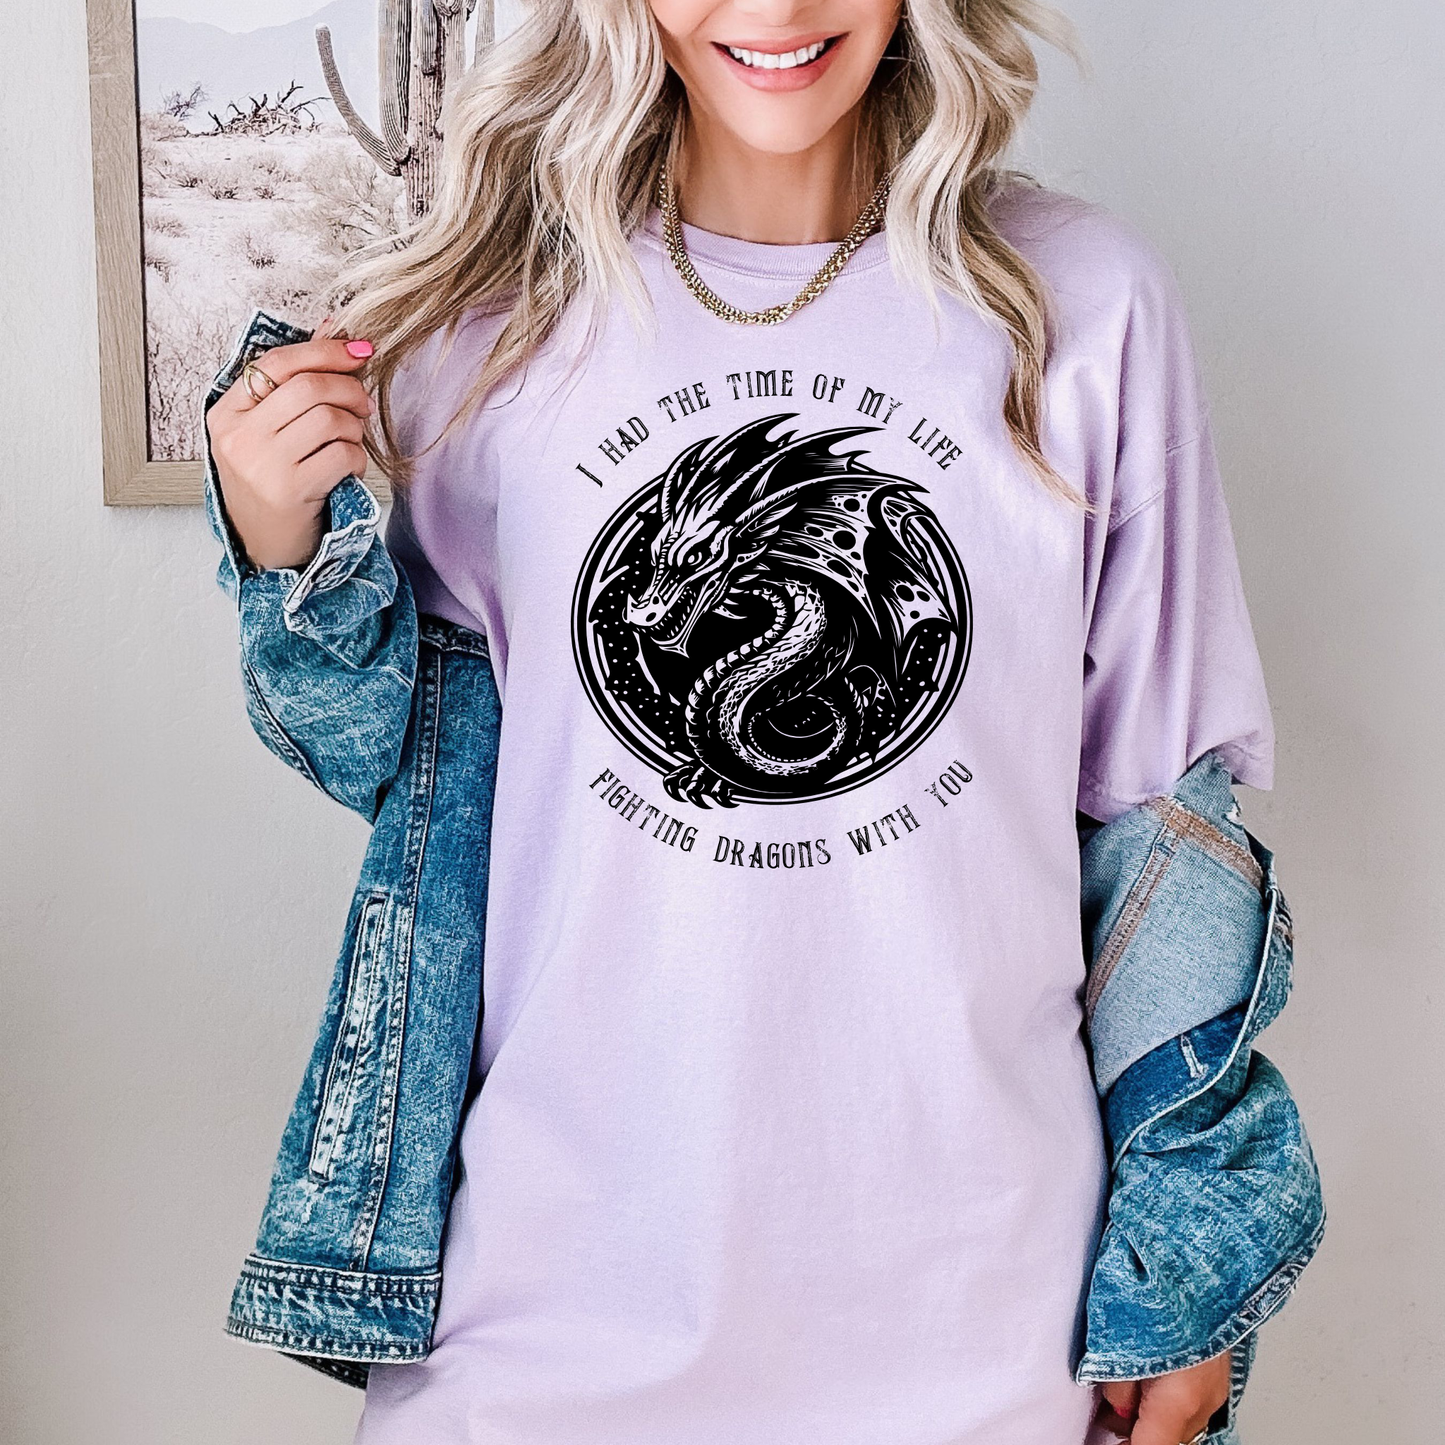 Fighting Dragons - Long Live -The Eras Tour - Taylor Swift - Adult & Youth Comfort Colors Concert Tee